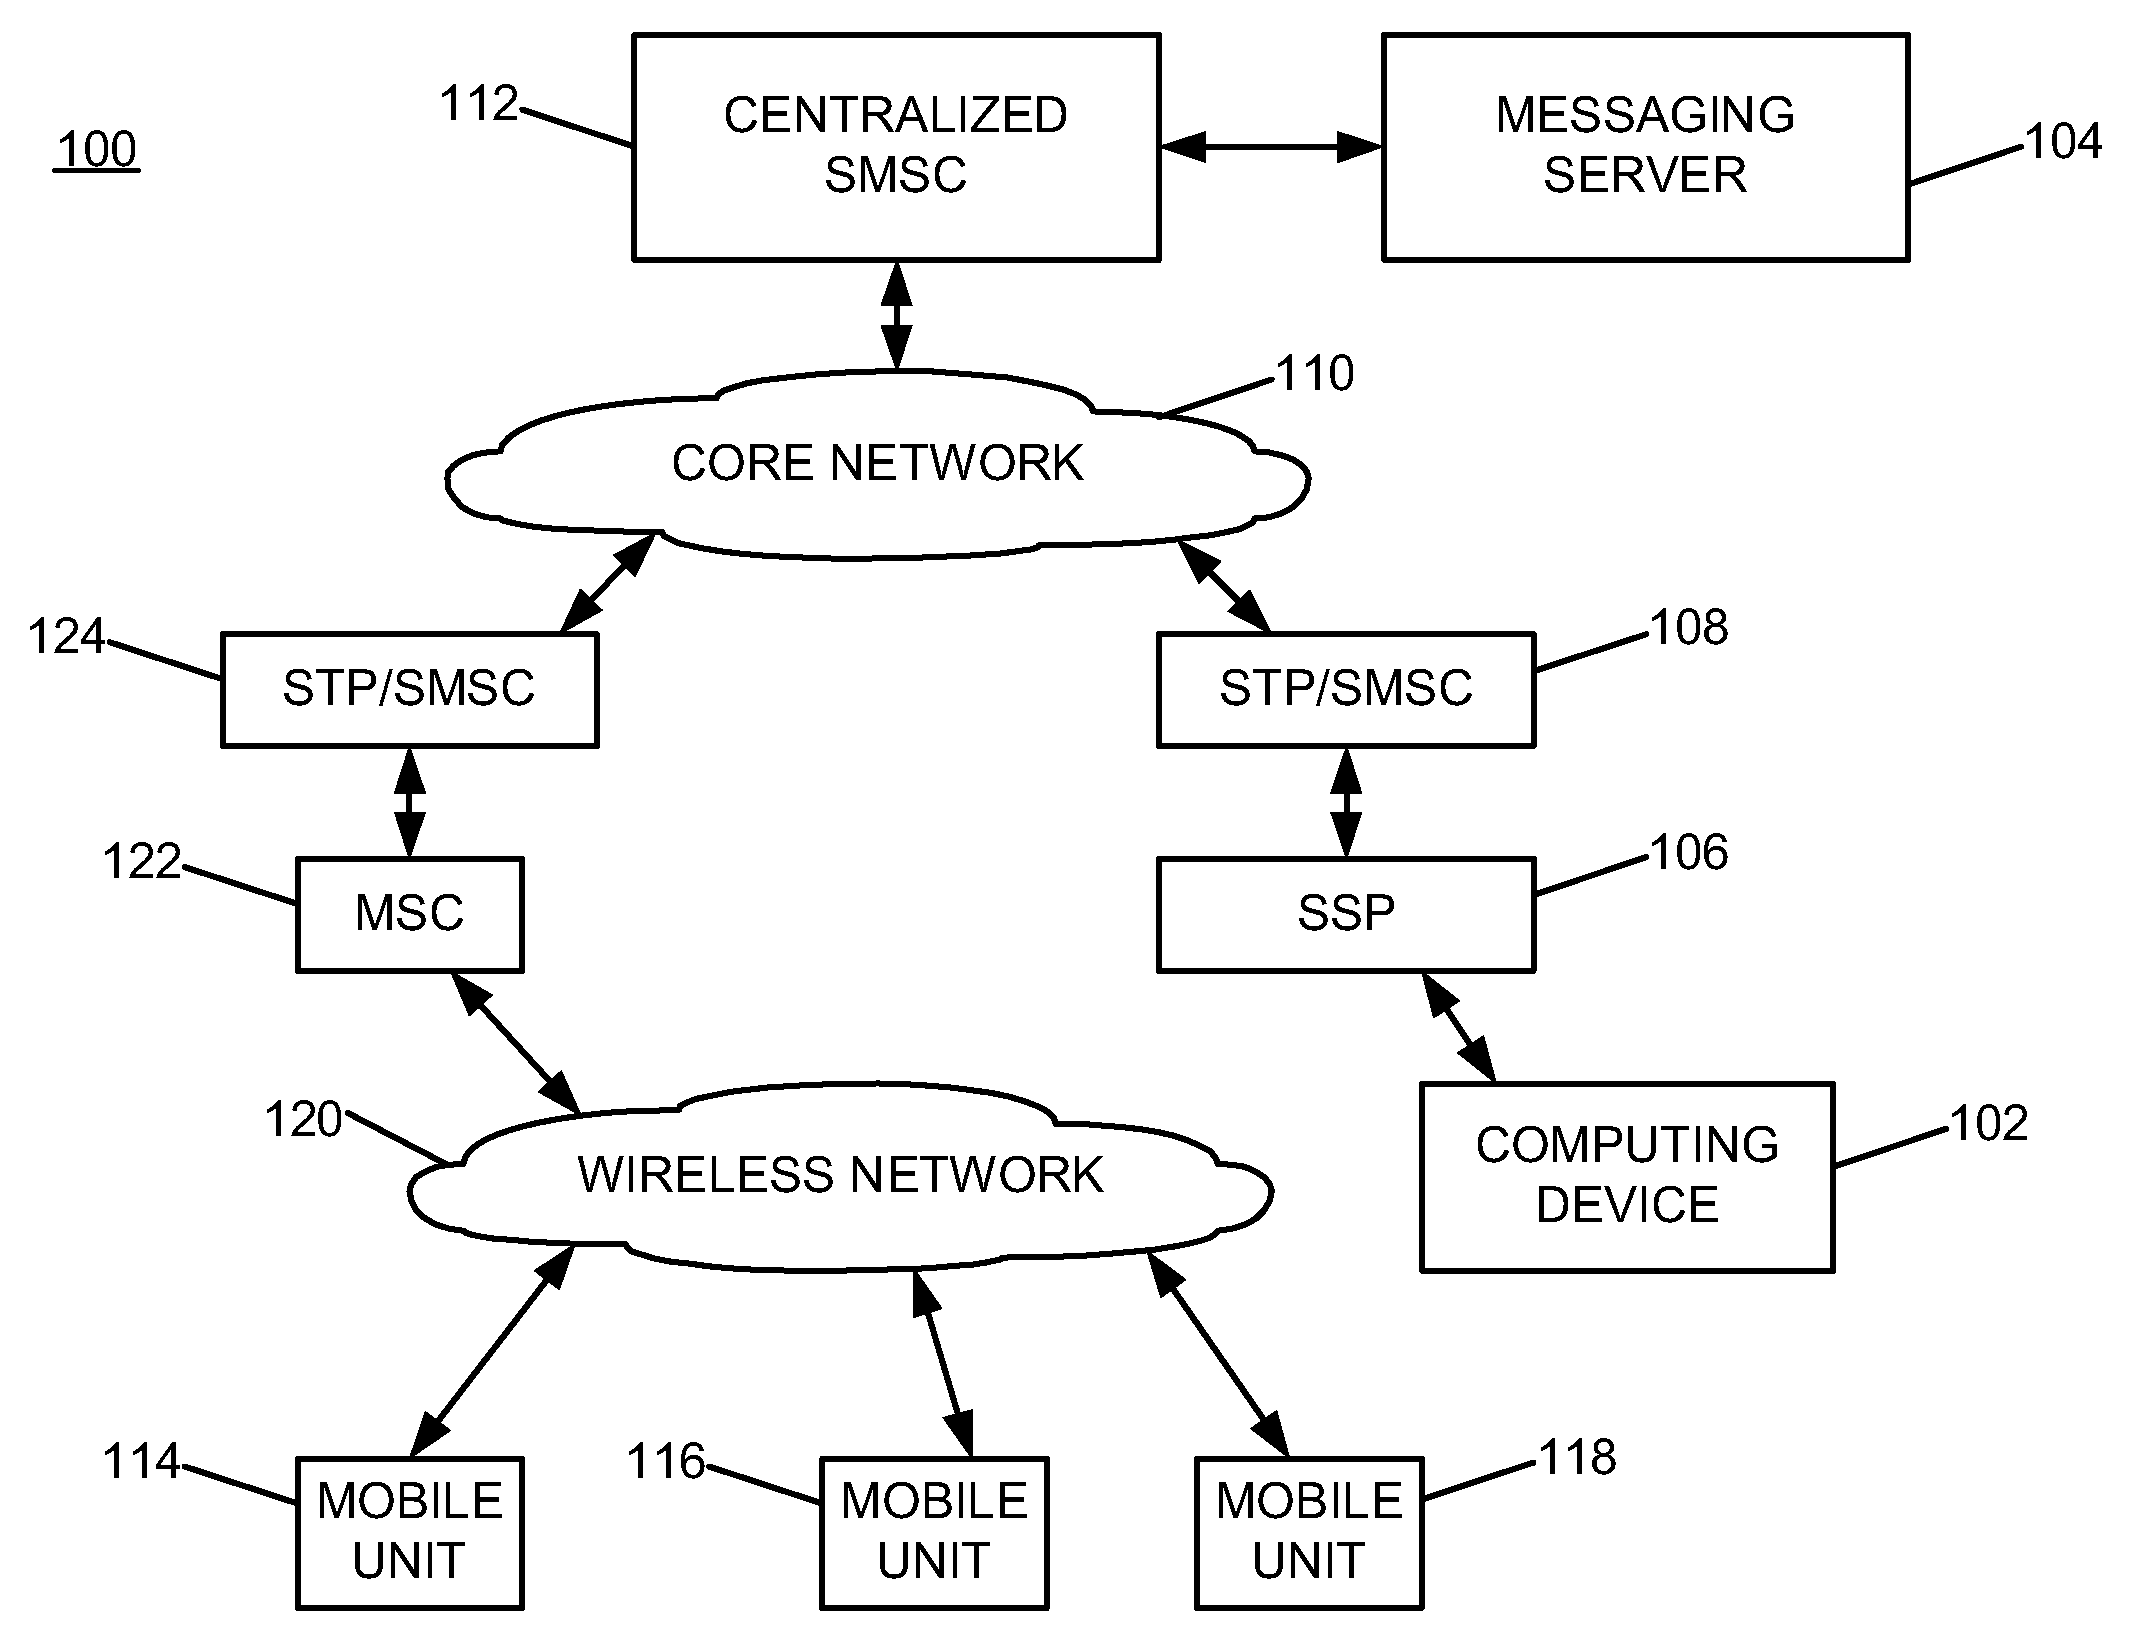 Mobile messaging system